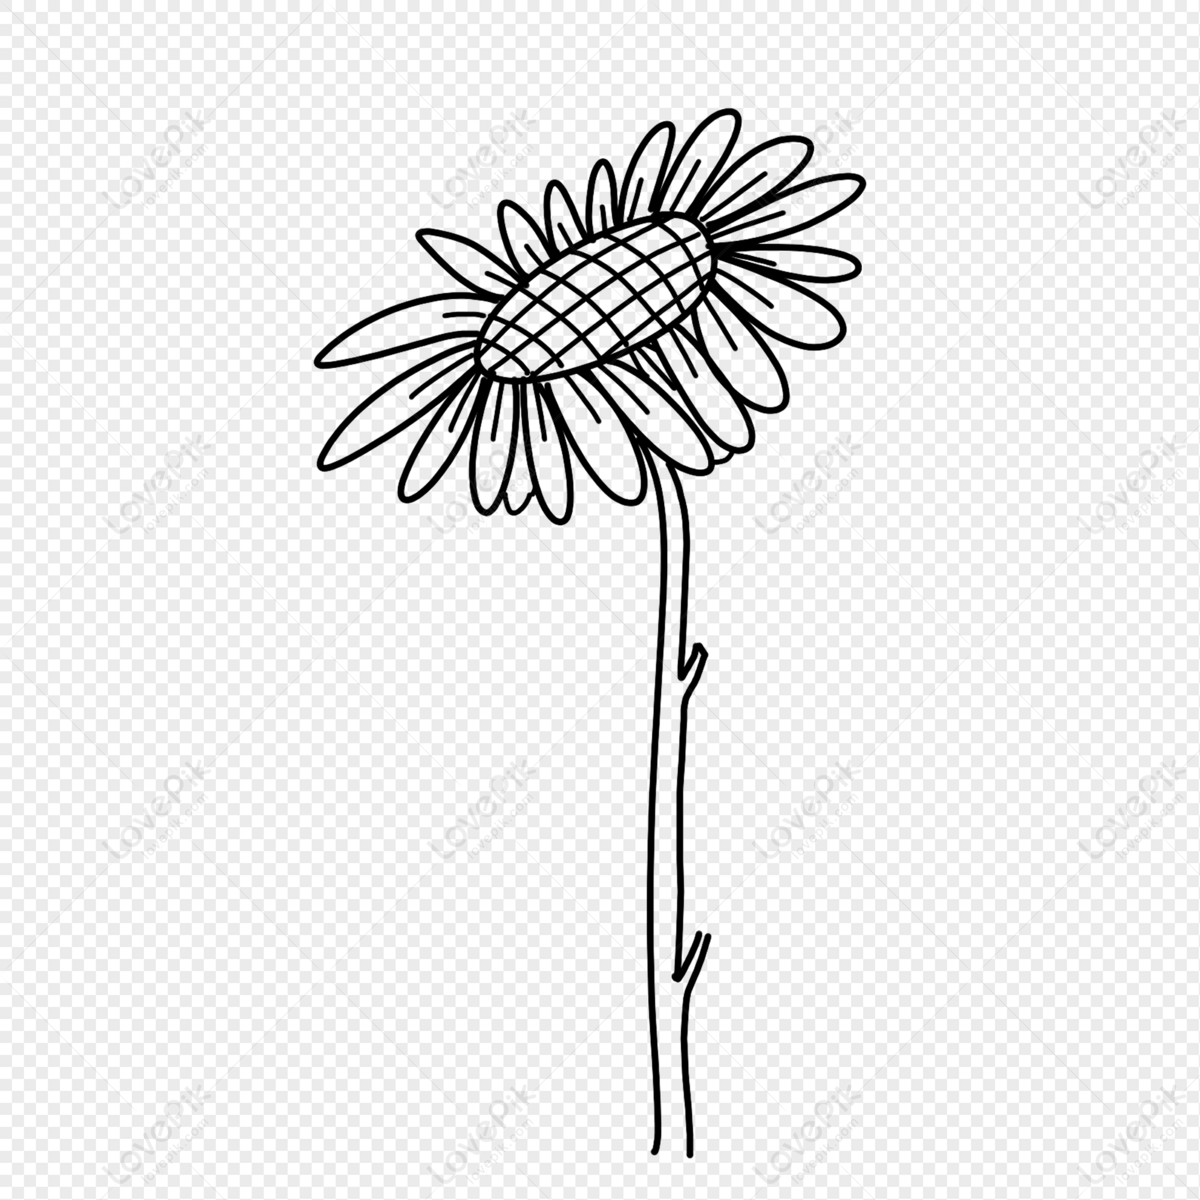 Sunflower Stick Figure PNG Picture And Clipart Image For Free Download ...